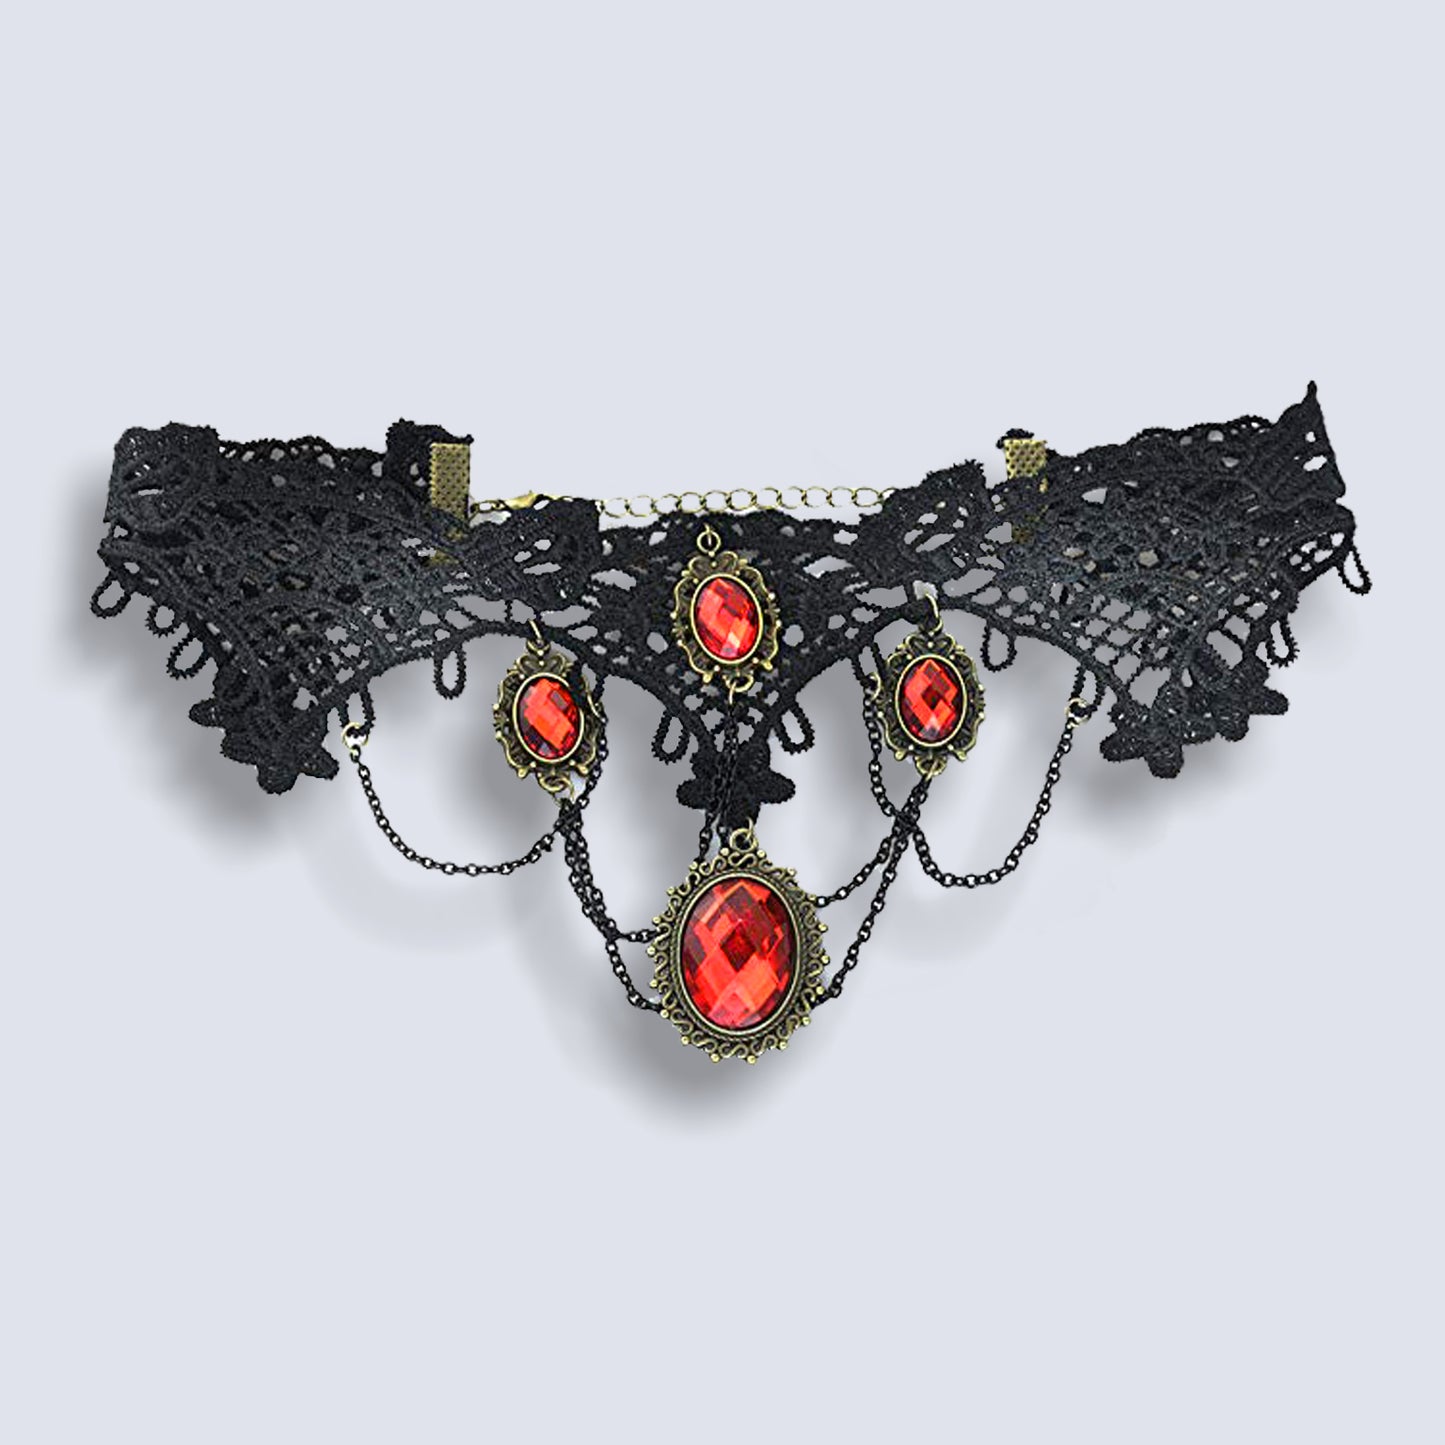 Gothic Black and Red Lace Bib Necklace Collar Choker Halloween Vintage Vampire